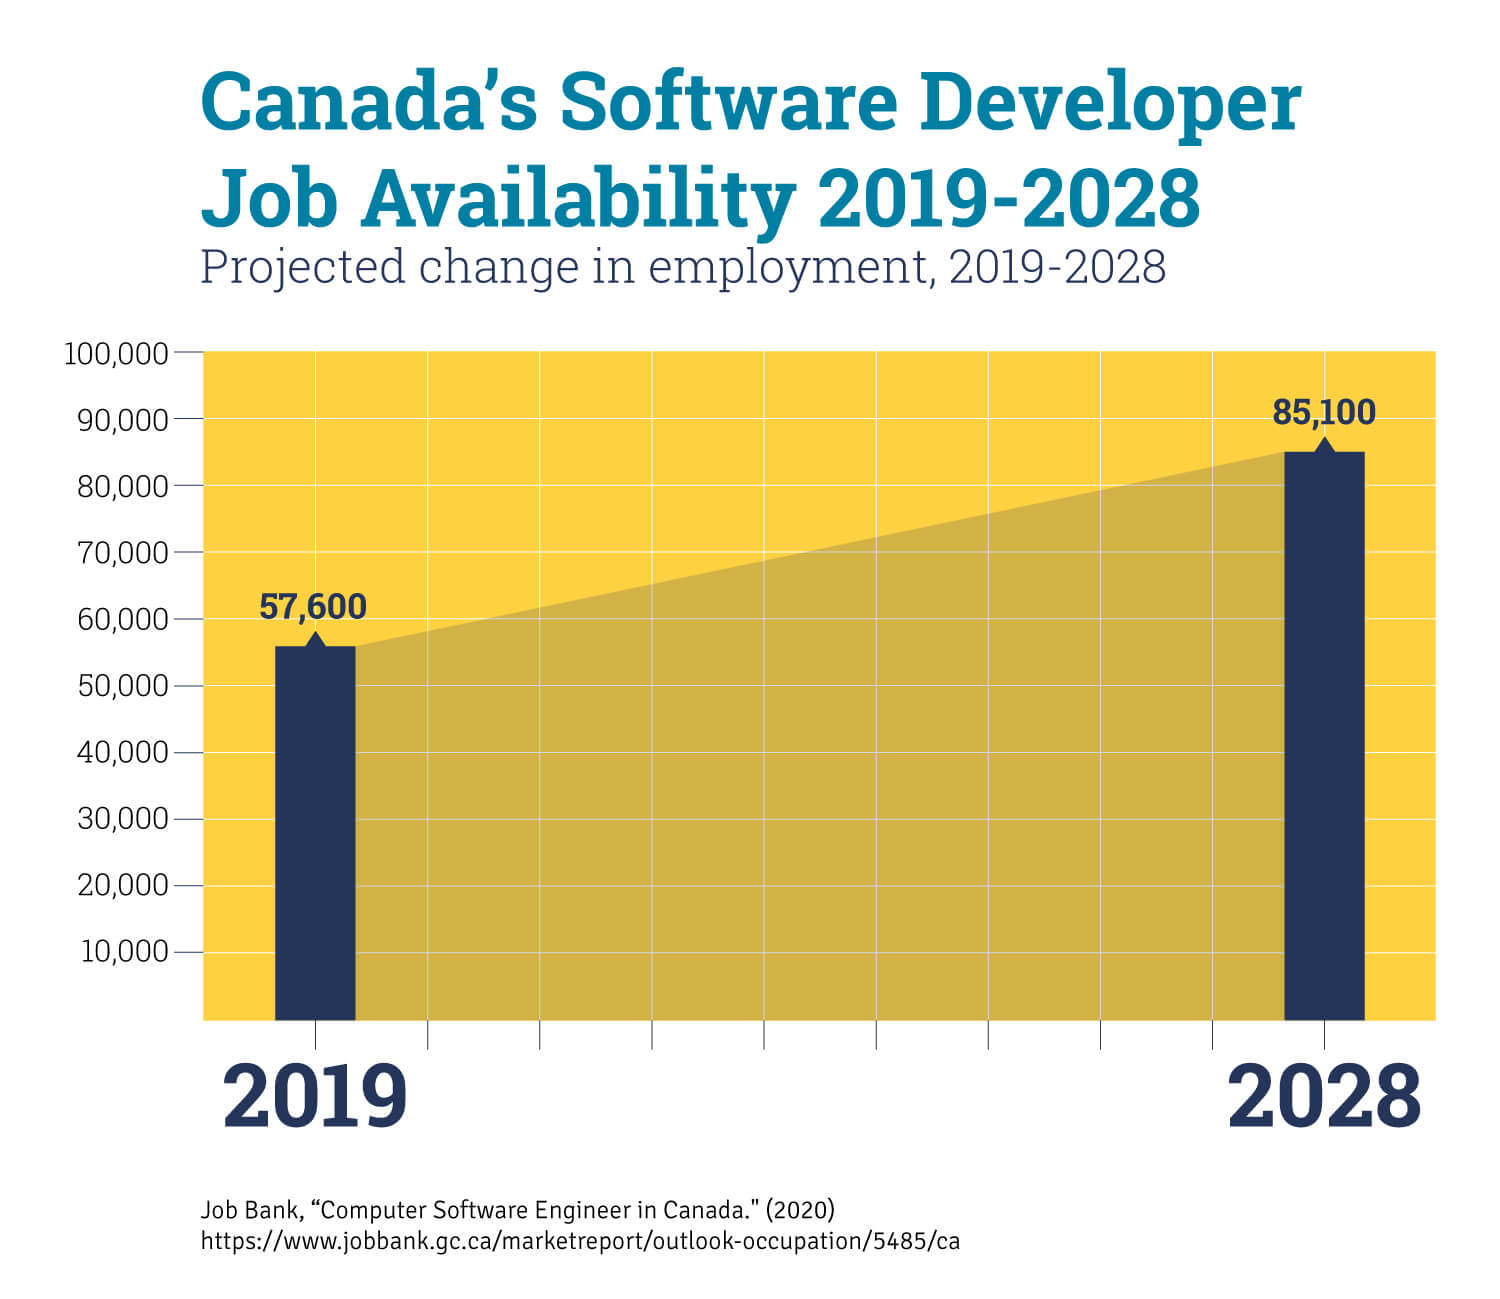 A chart that shows the projected job growth for full stack developers in Canada